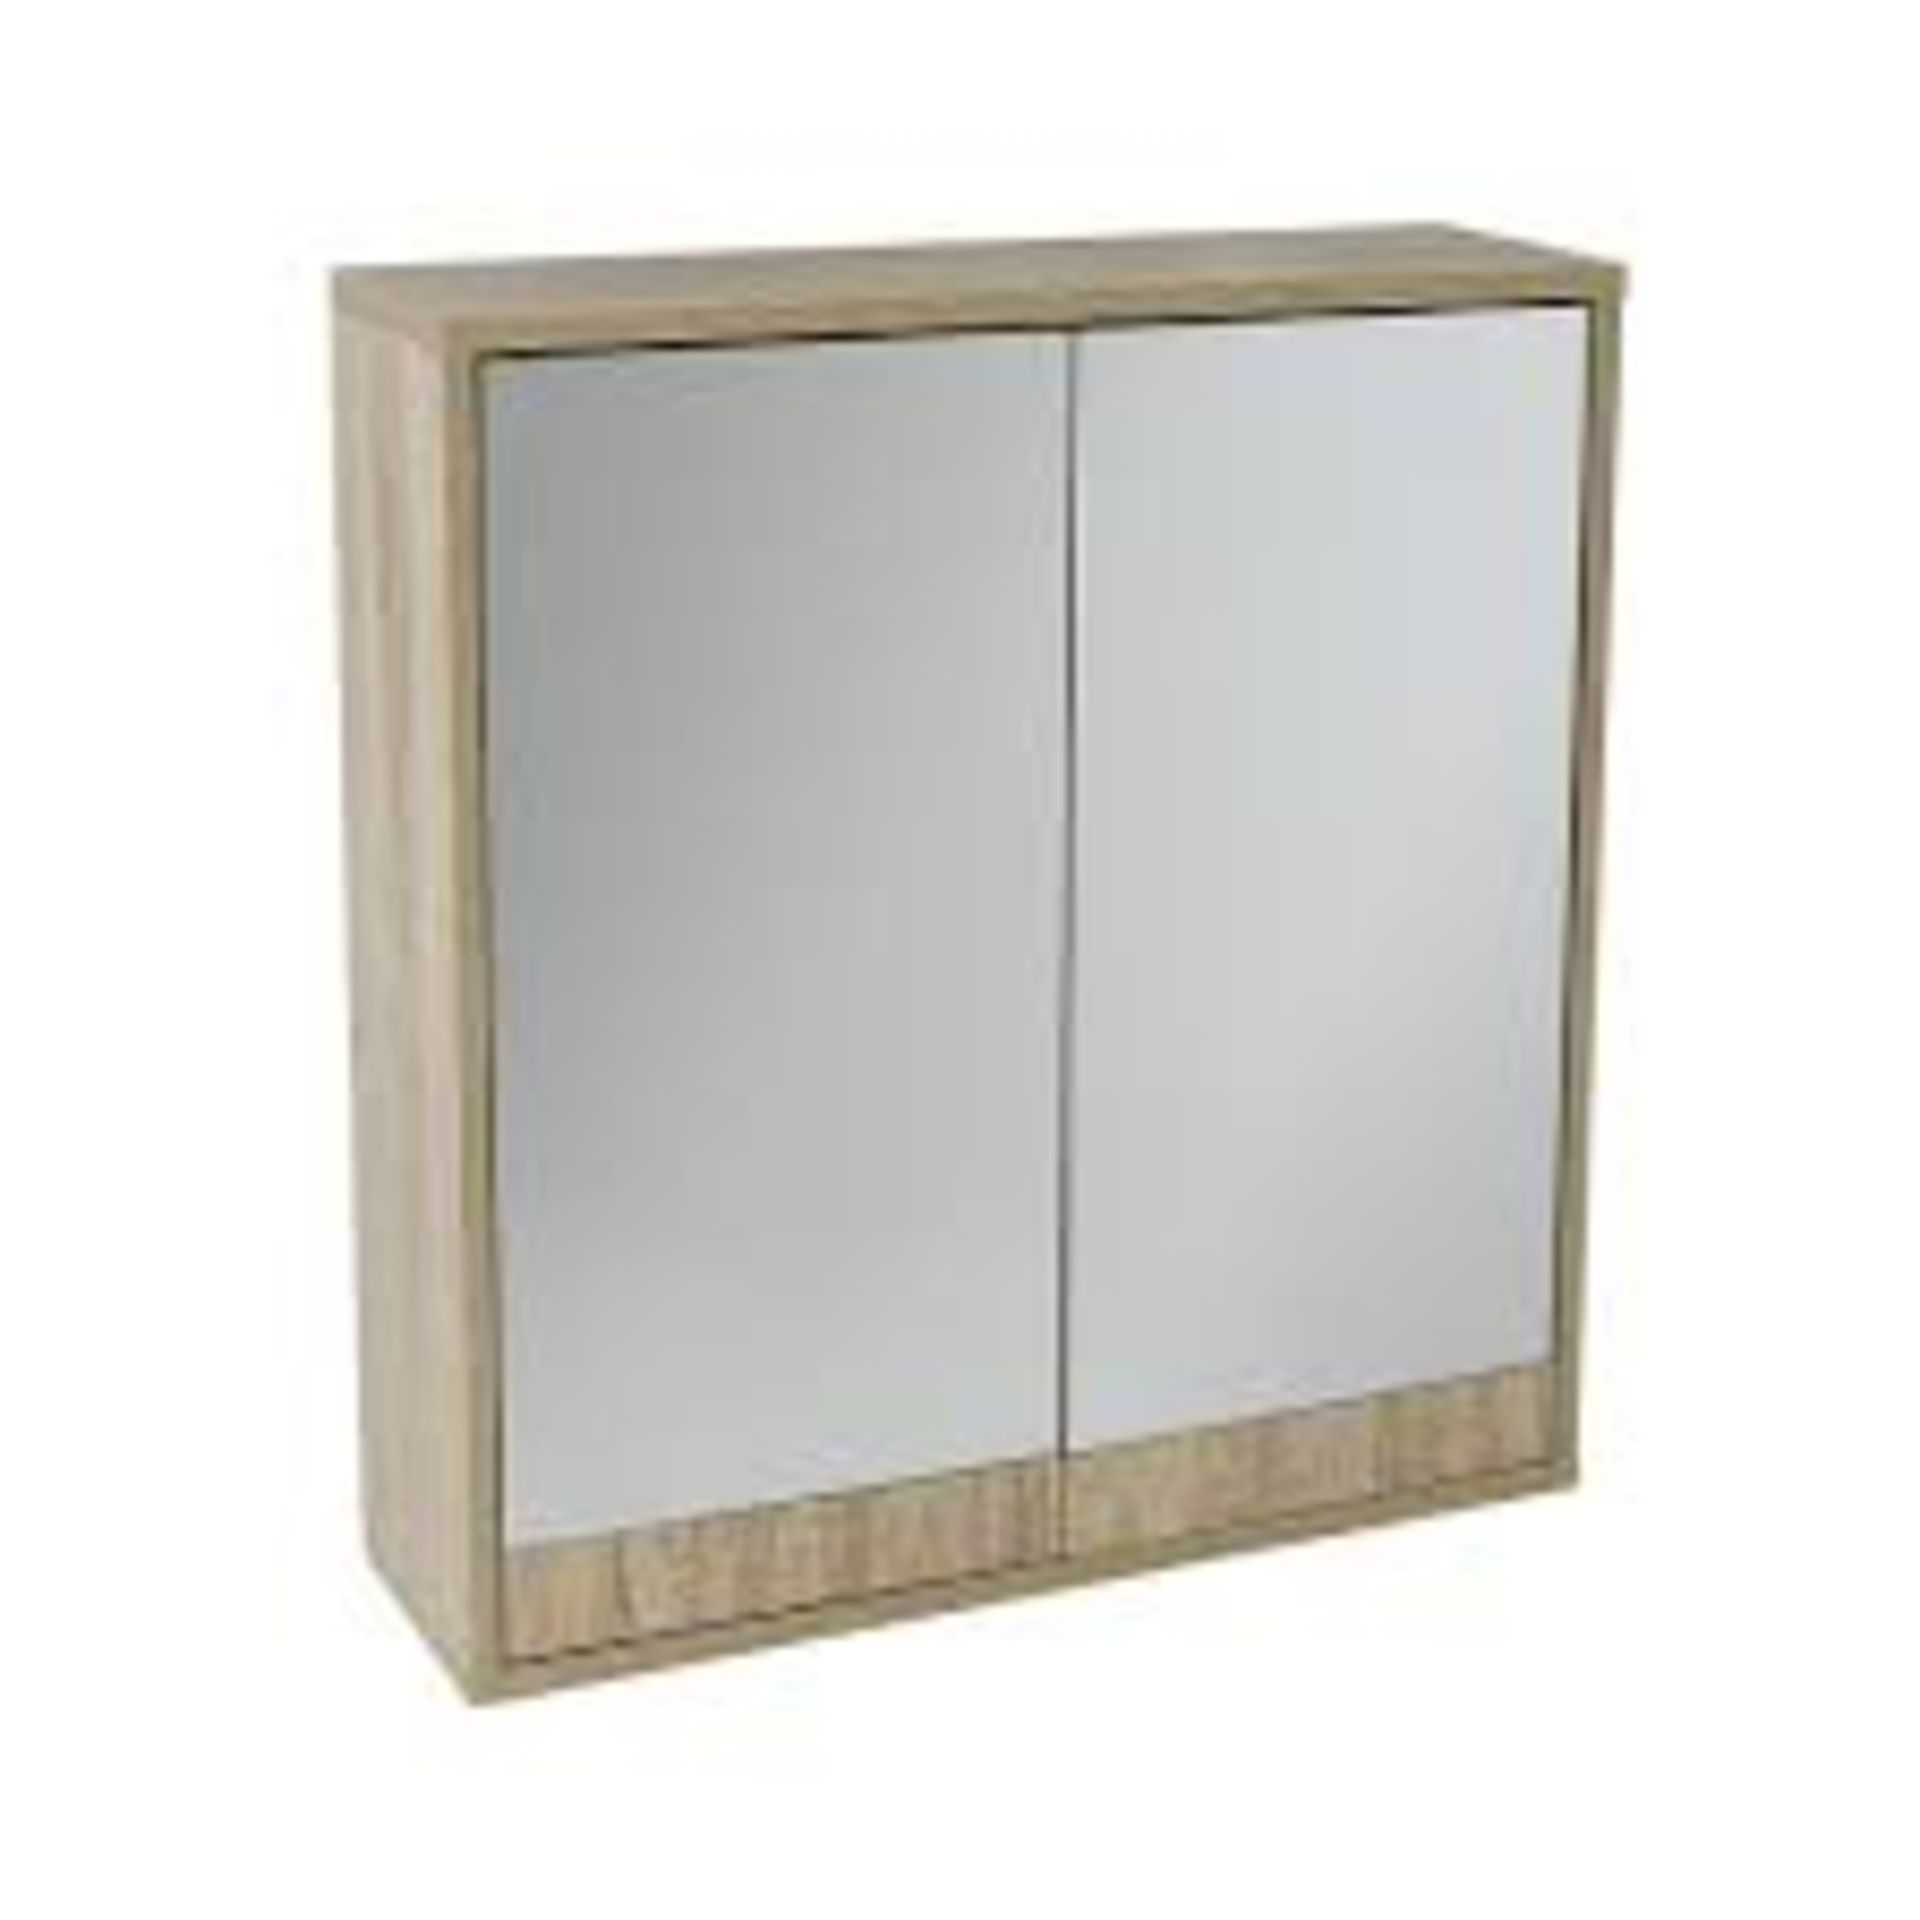 Maia Mirrored Bathroom Wall Cabinet - SR3. This Maia contemporary style oak effect finish double